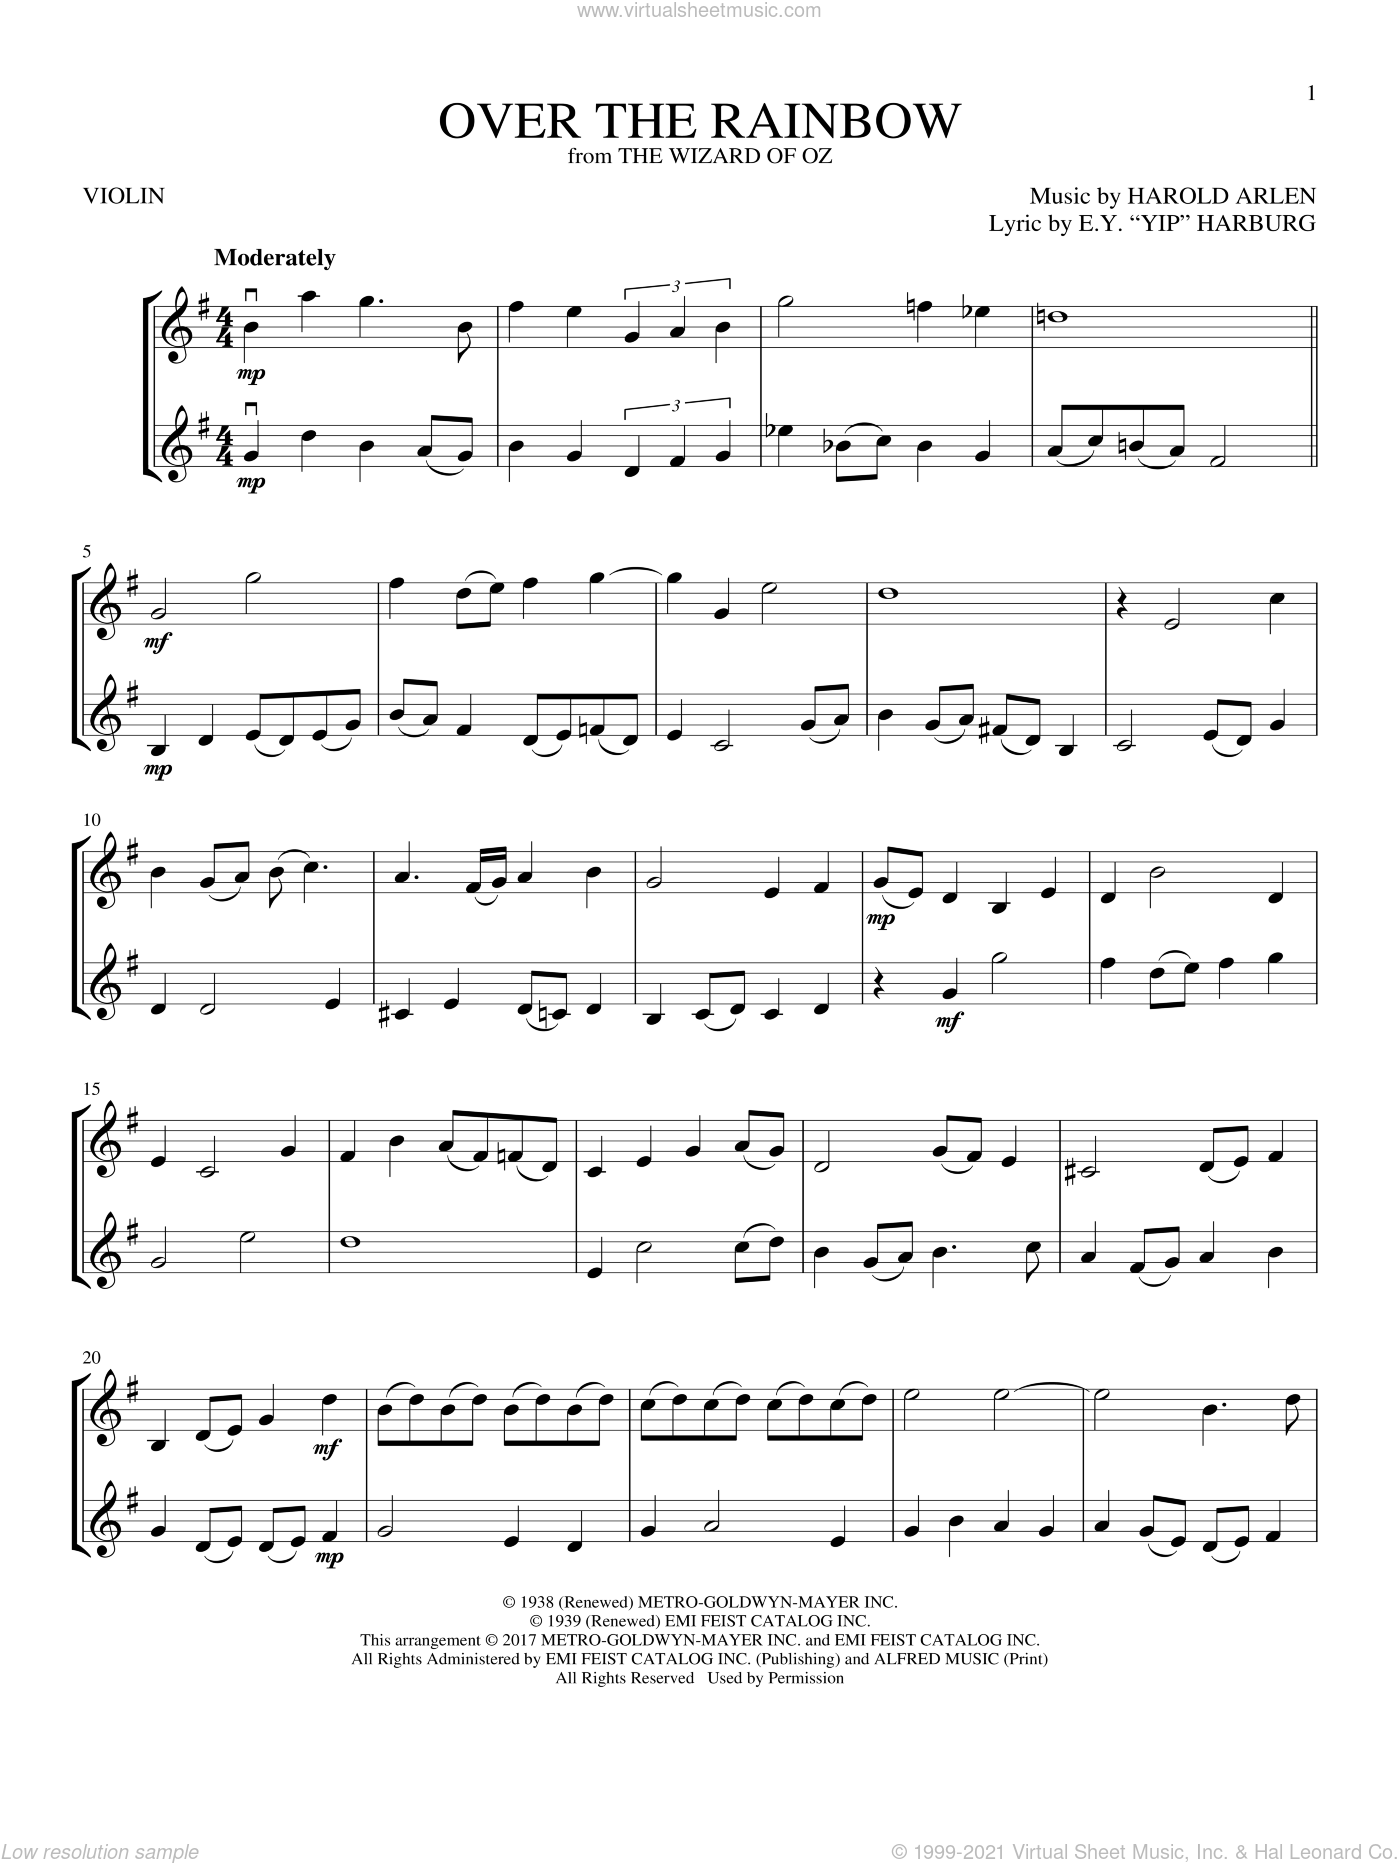 Arlen - Over The Rainbow sheet music for two violins (duets, violin duets)